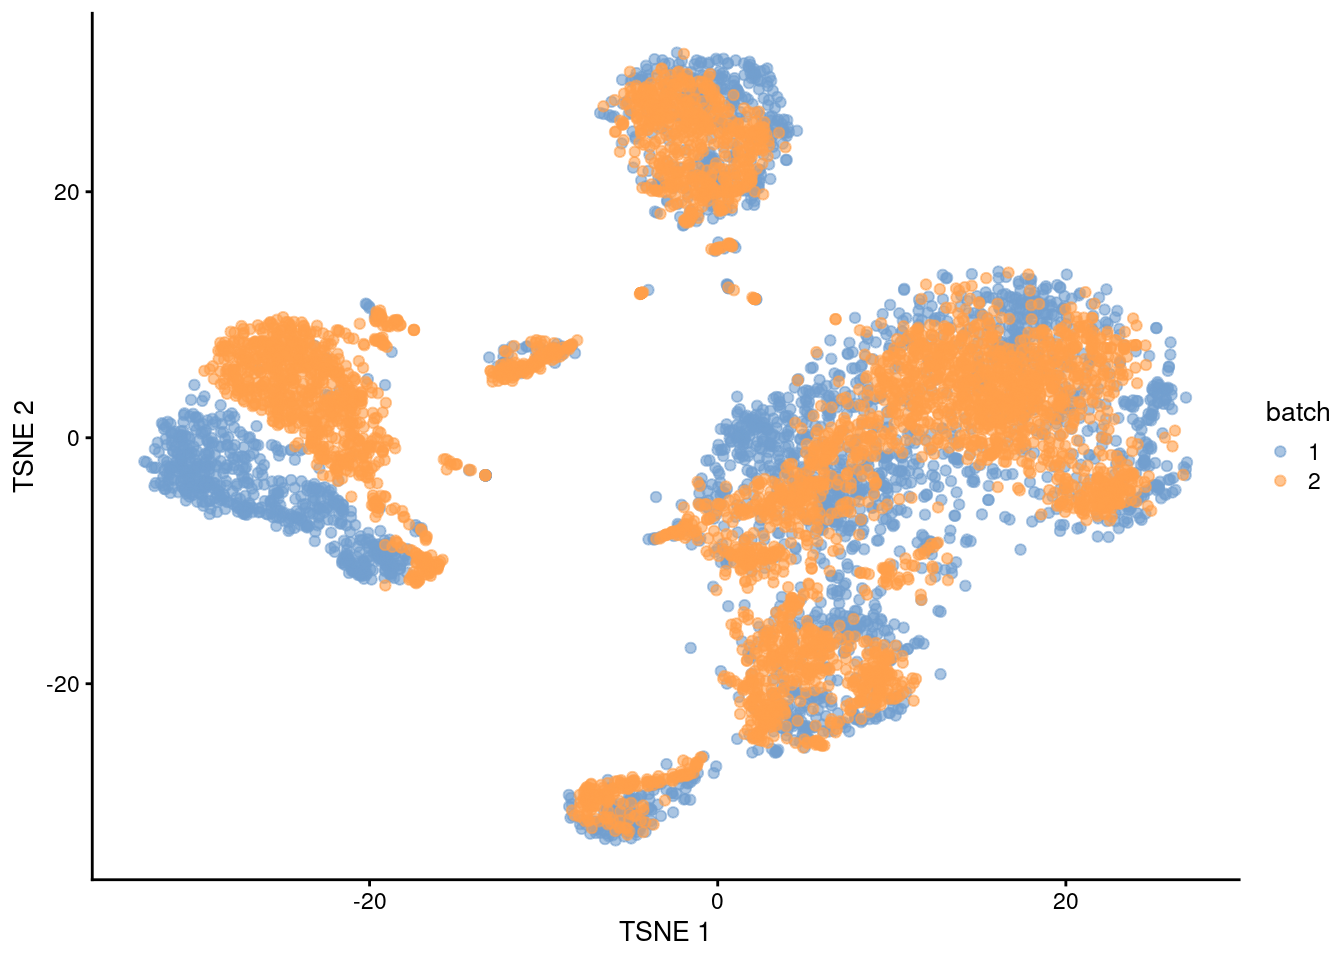 $t$-SNE plot of the PBMC datasets after correction with `rescaleBatches()`. Each point represents a cell and is colored according to the batch of origin.